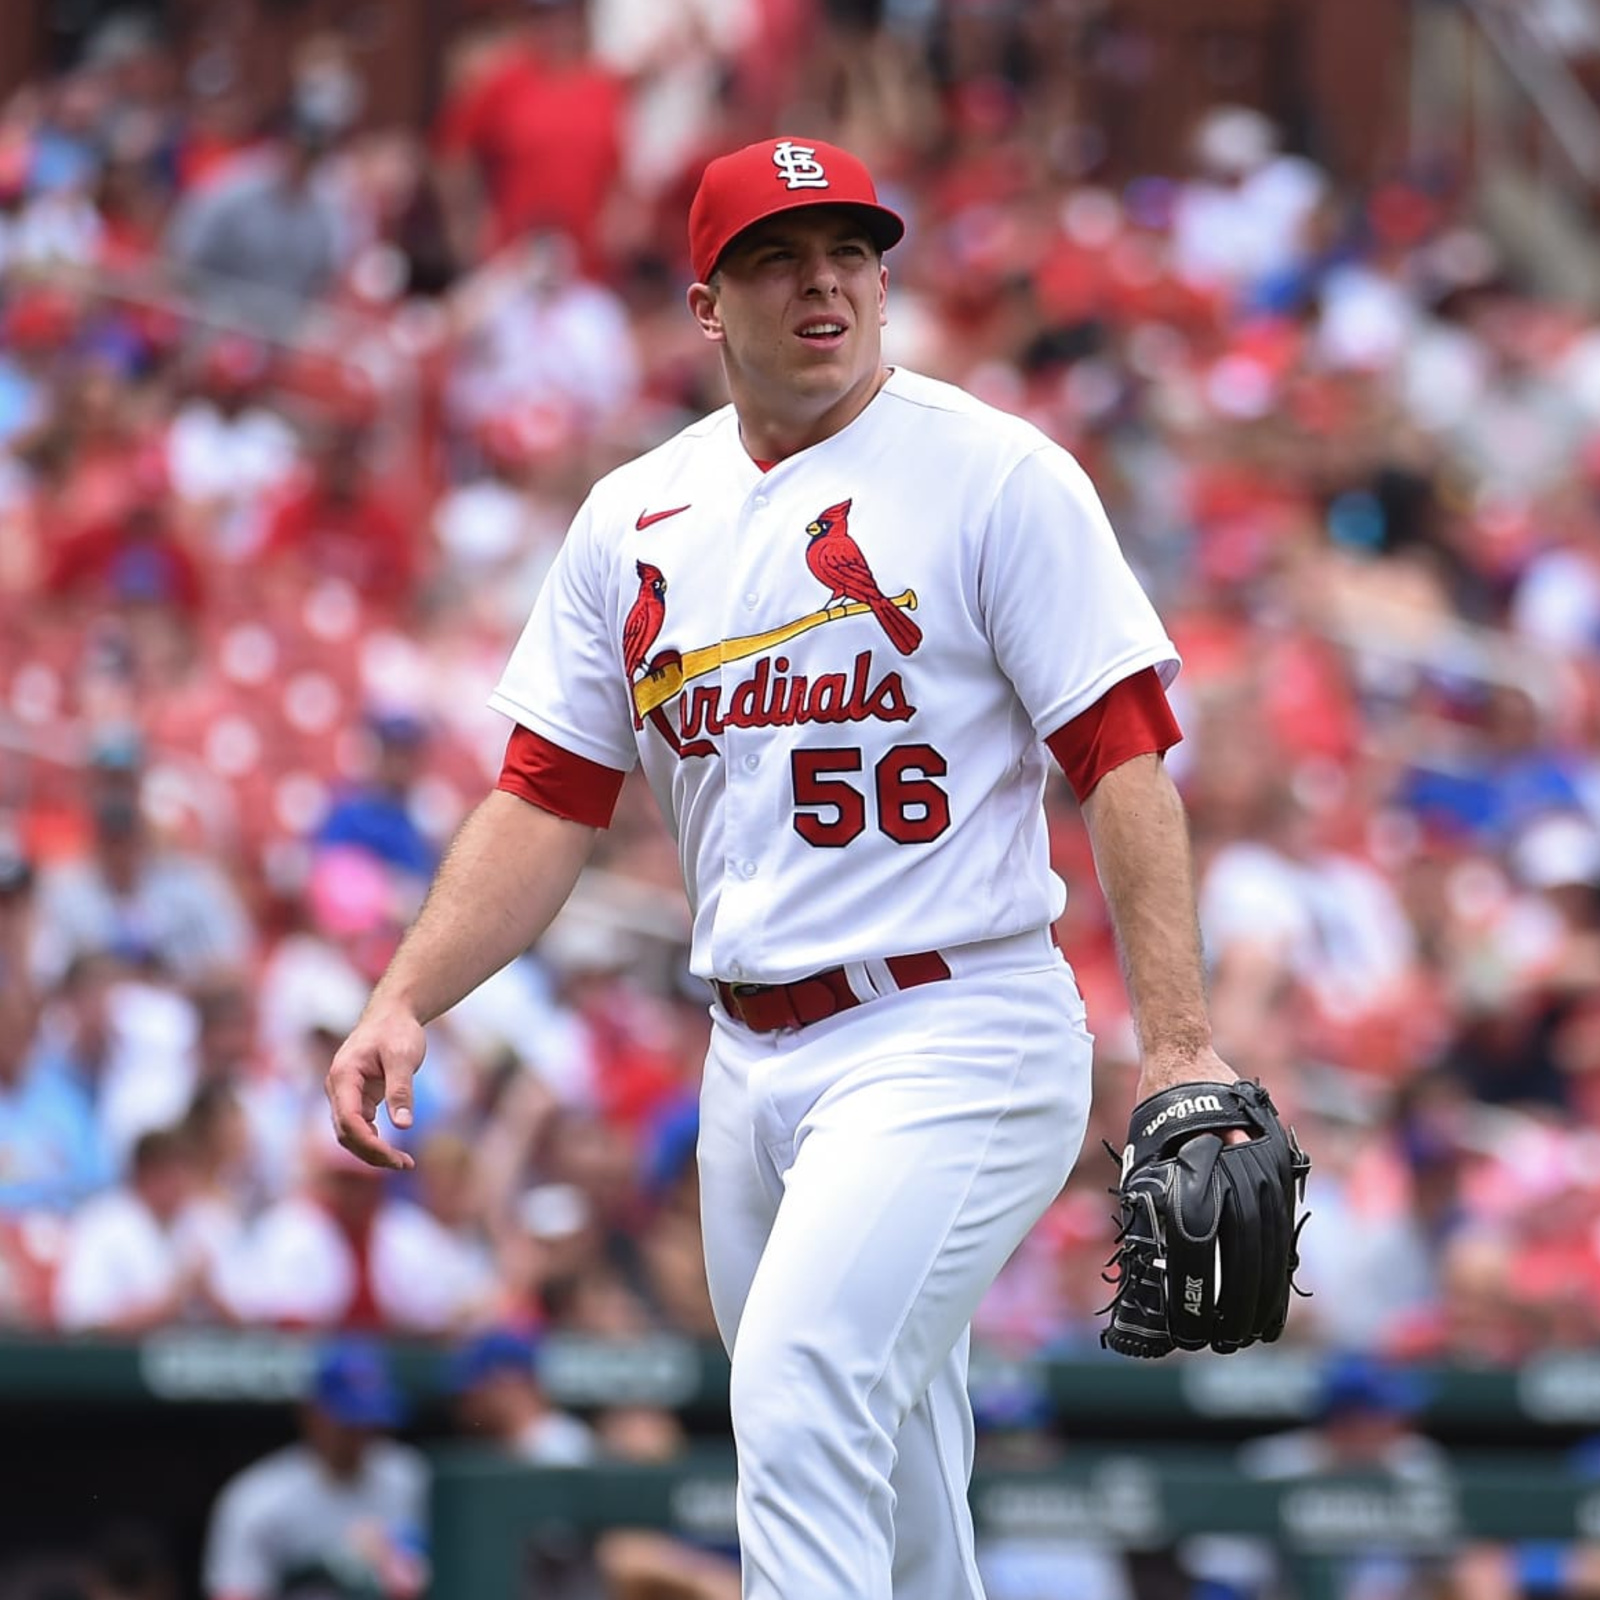 Cardinals closer Helsley reportedly still not close to returning from IL